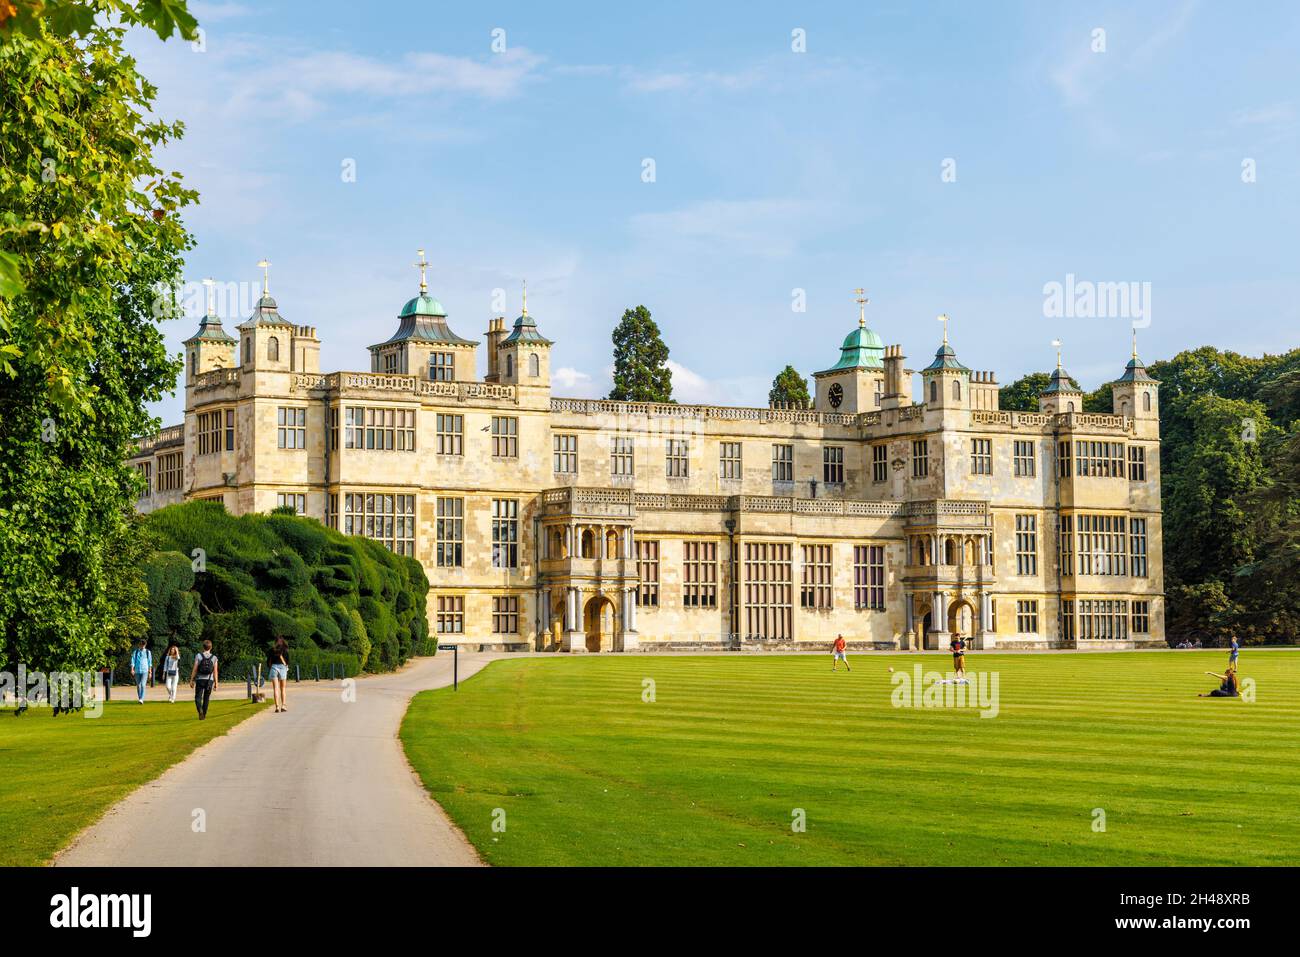 Audley End House, a largely early 17th-century Jacobean country house near Saffron Walden, Essex, England Stock Photo